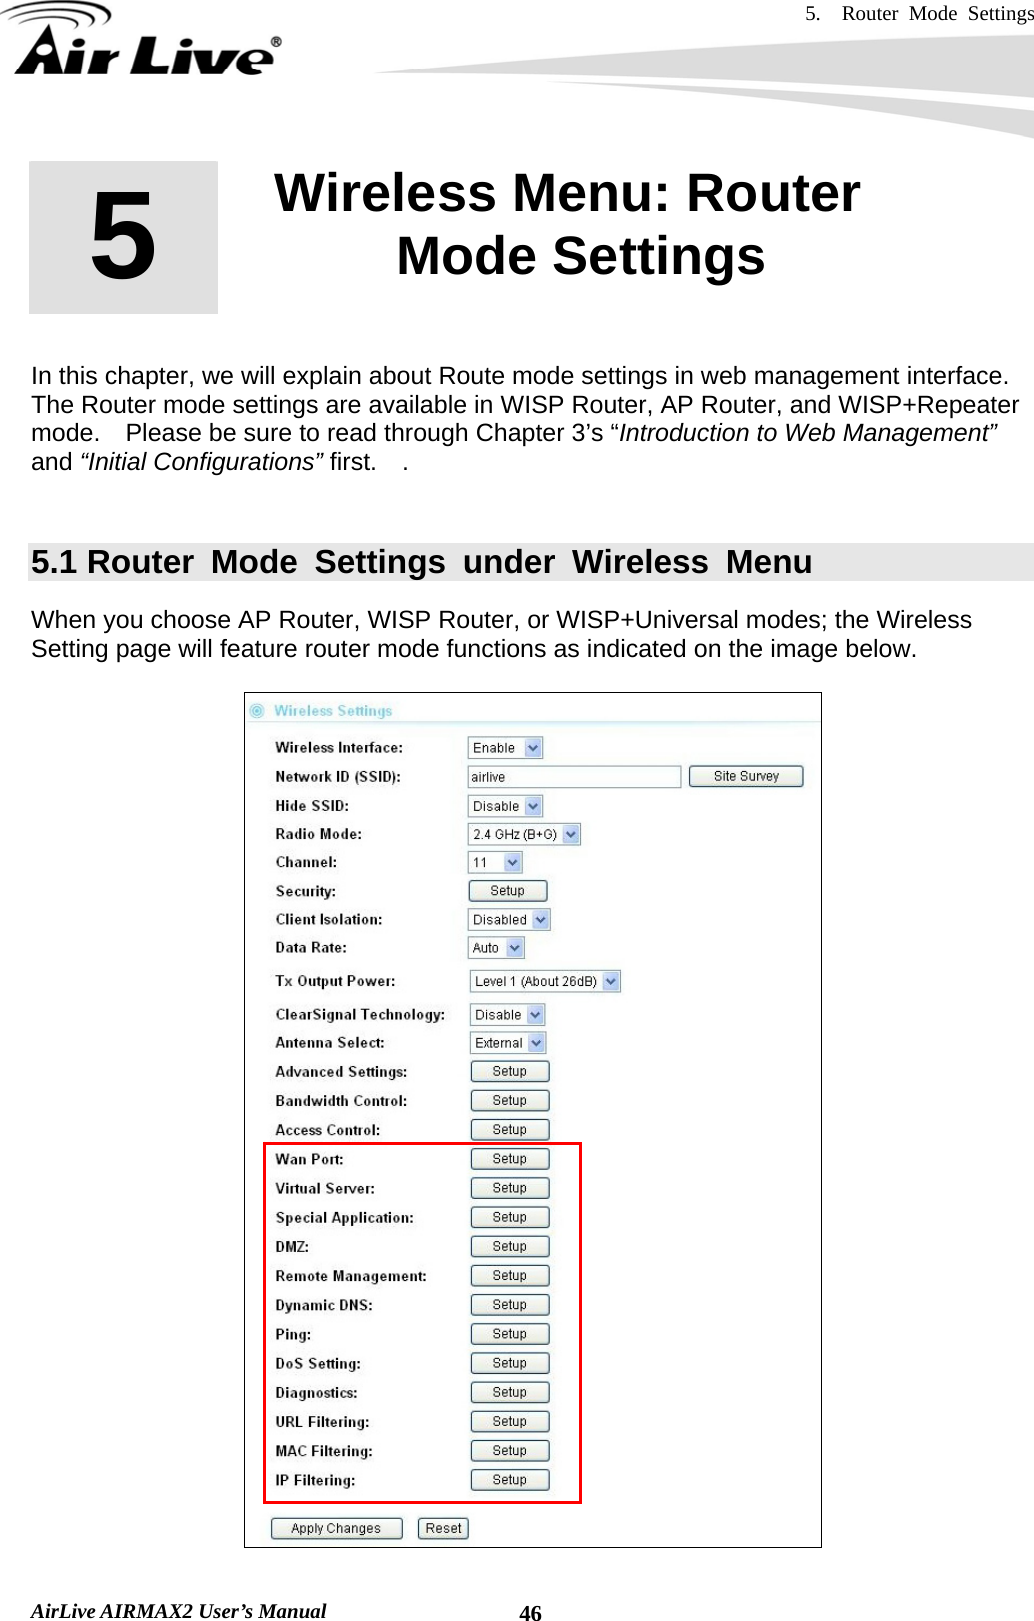 5.  Router Mode Settings    AirLive AIRMAX2 User’s Manual  46       In this chapter, we will explain about Route mode settings in web management interface.   The Router mode settings are available in WISP Router, AP Router, and WISP+Repeater mode.    Please be sure to read through Chapter 3’s “Introduction to Web Management” and “Initial Configurations” first.  .   5.1 Router Mode Settings under Wireless Menu When you choose AP Router, WISP Router, or WISP+Universal modes; the Wireless Setting page will feature router mode functions as indicated on the image below.    5  5. Wireless Menu: Router Mode Settings  